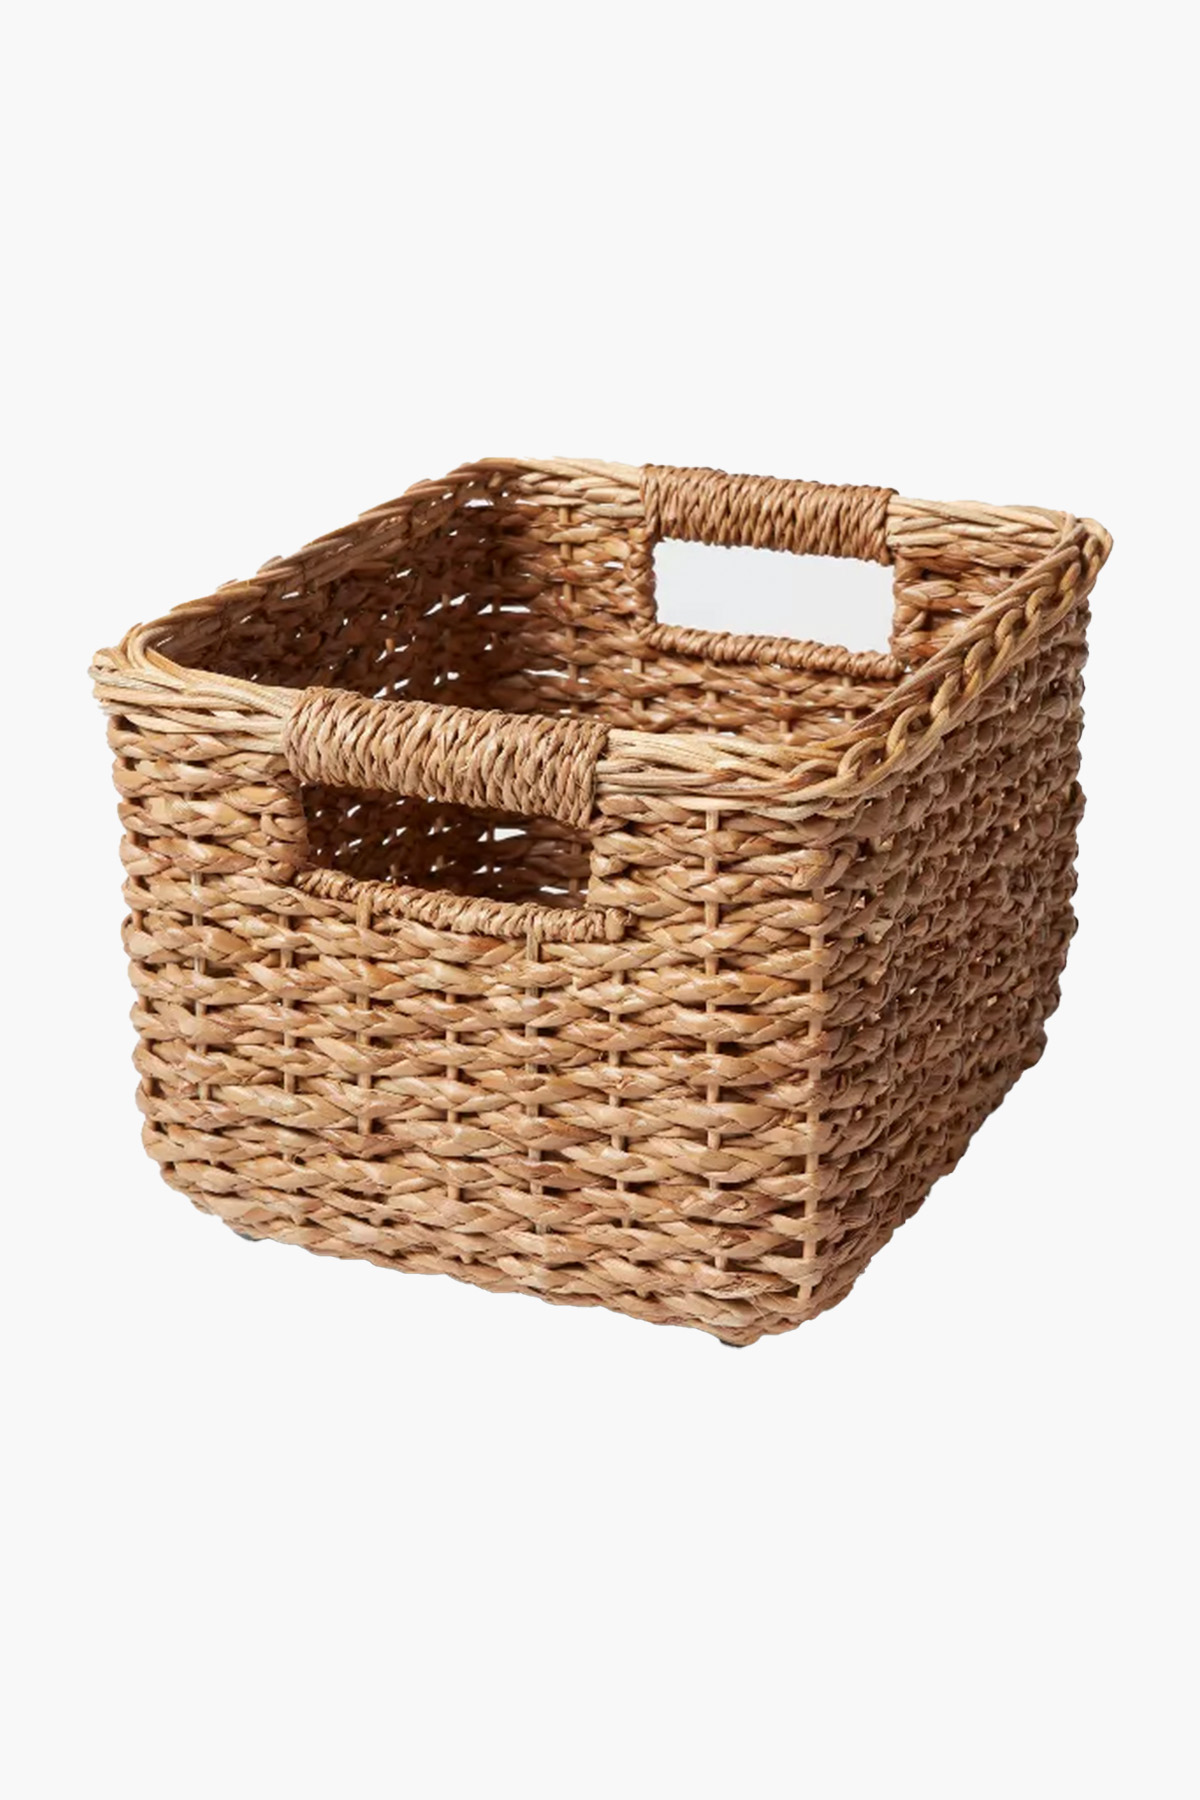 14 Inch Wide Baskets & Storage Containers at